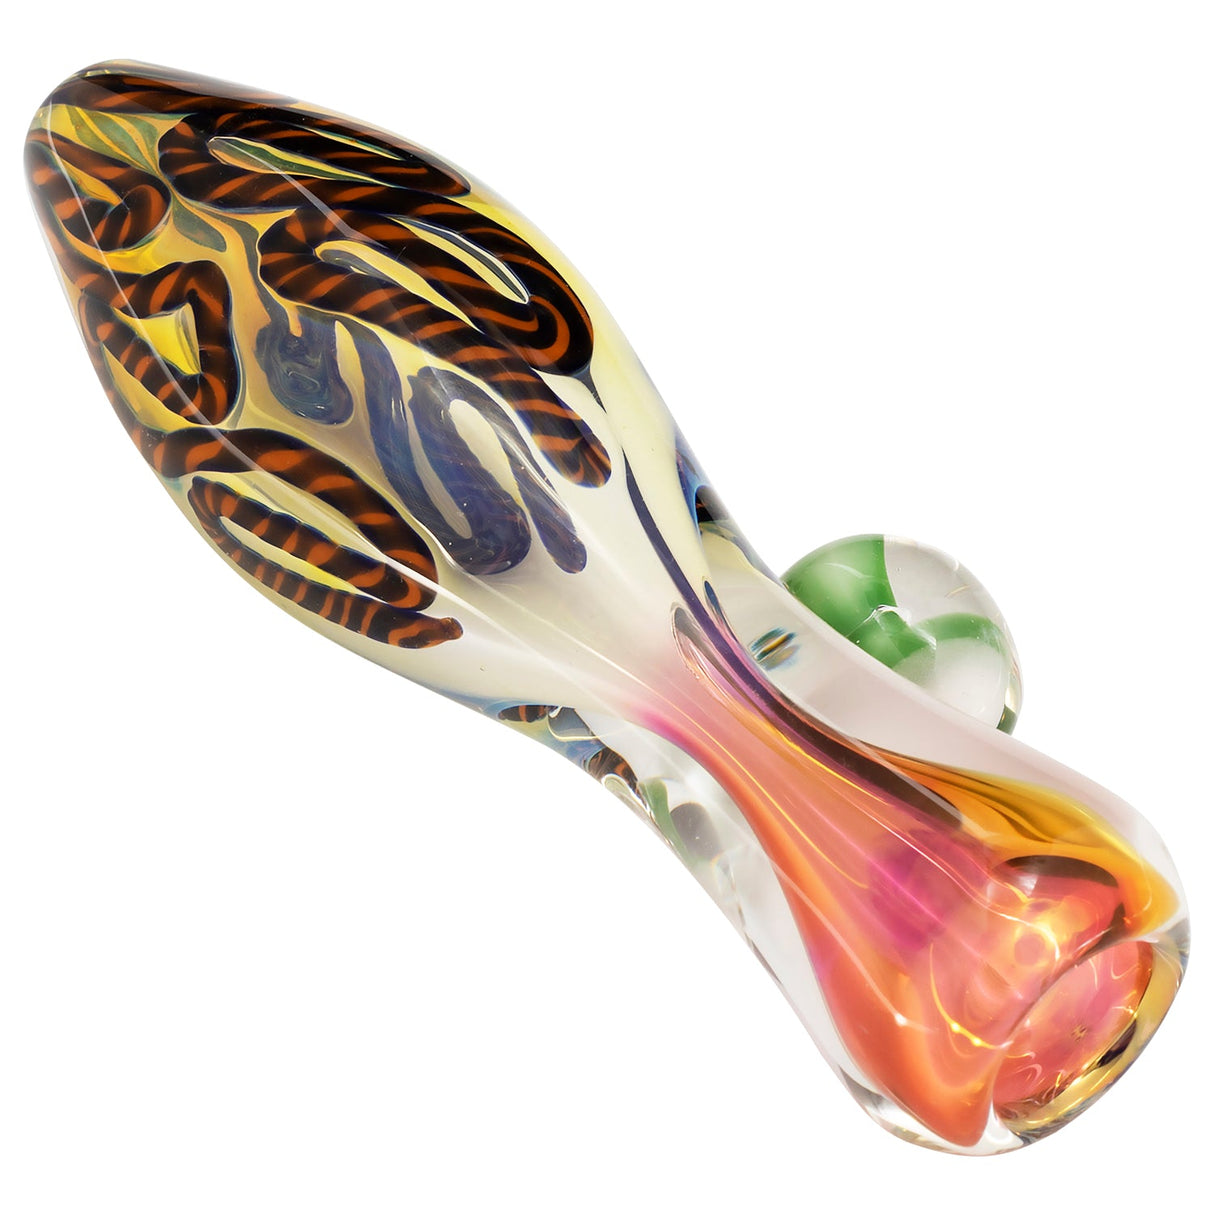 LA Pipes "Fun-Guy" Glass Chillum with Fumed Color Changing Design, 3.25" Length, USA Made